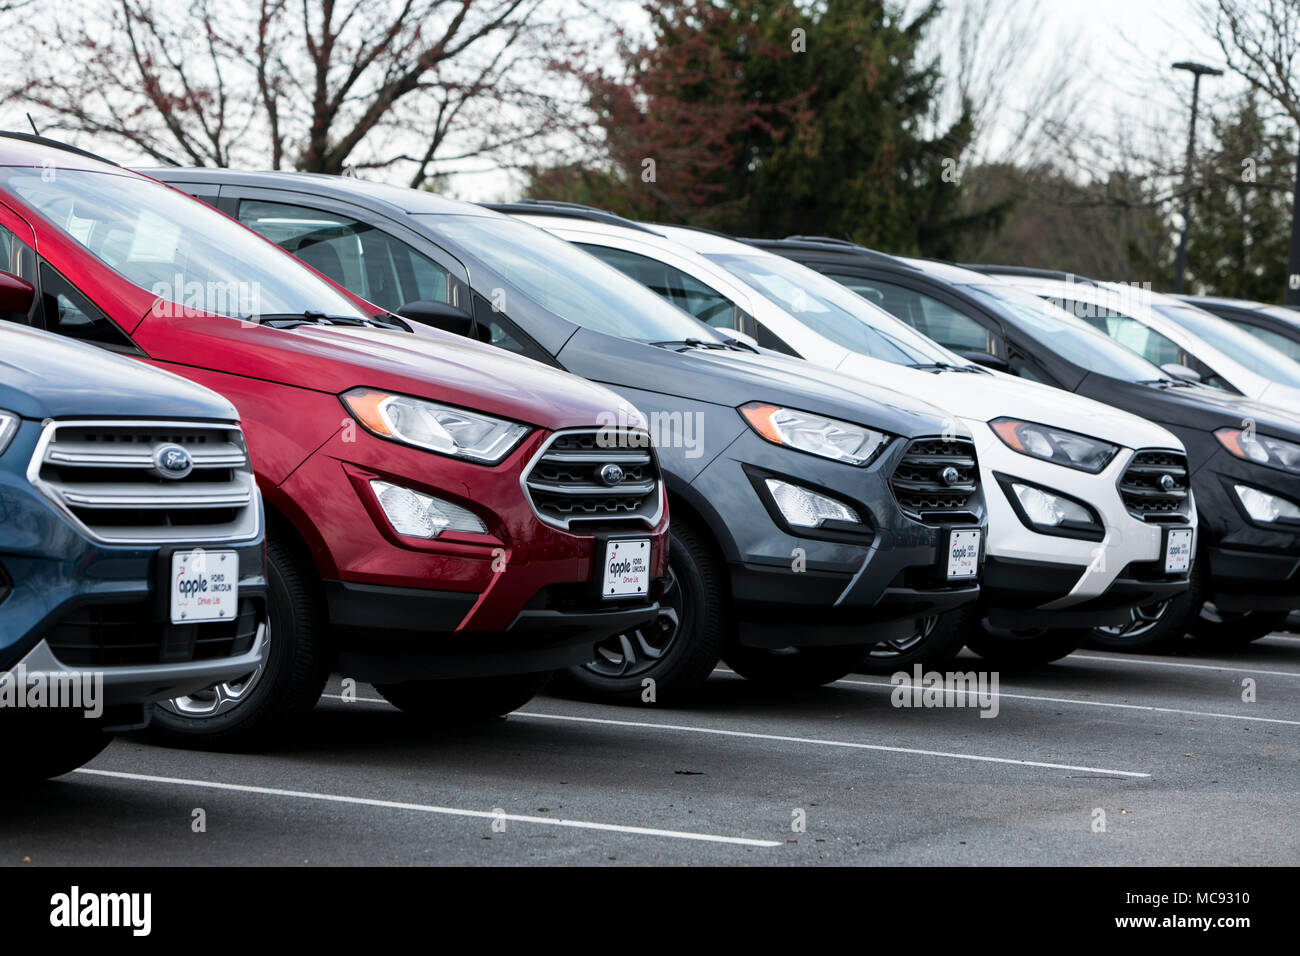 A row of new Ford Escape SUV vehicles at a car dealership in Columbia, Maryland on April 13, 2018. Stock Photo